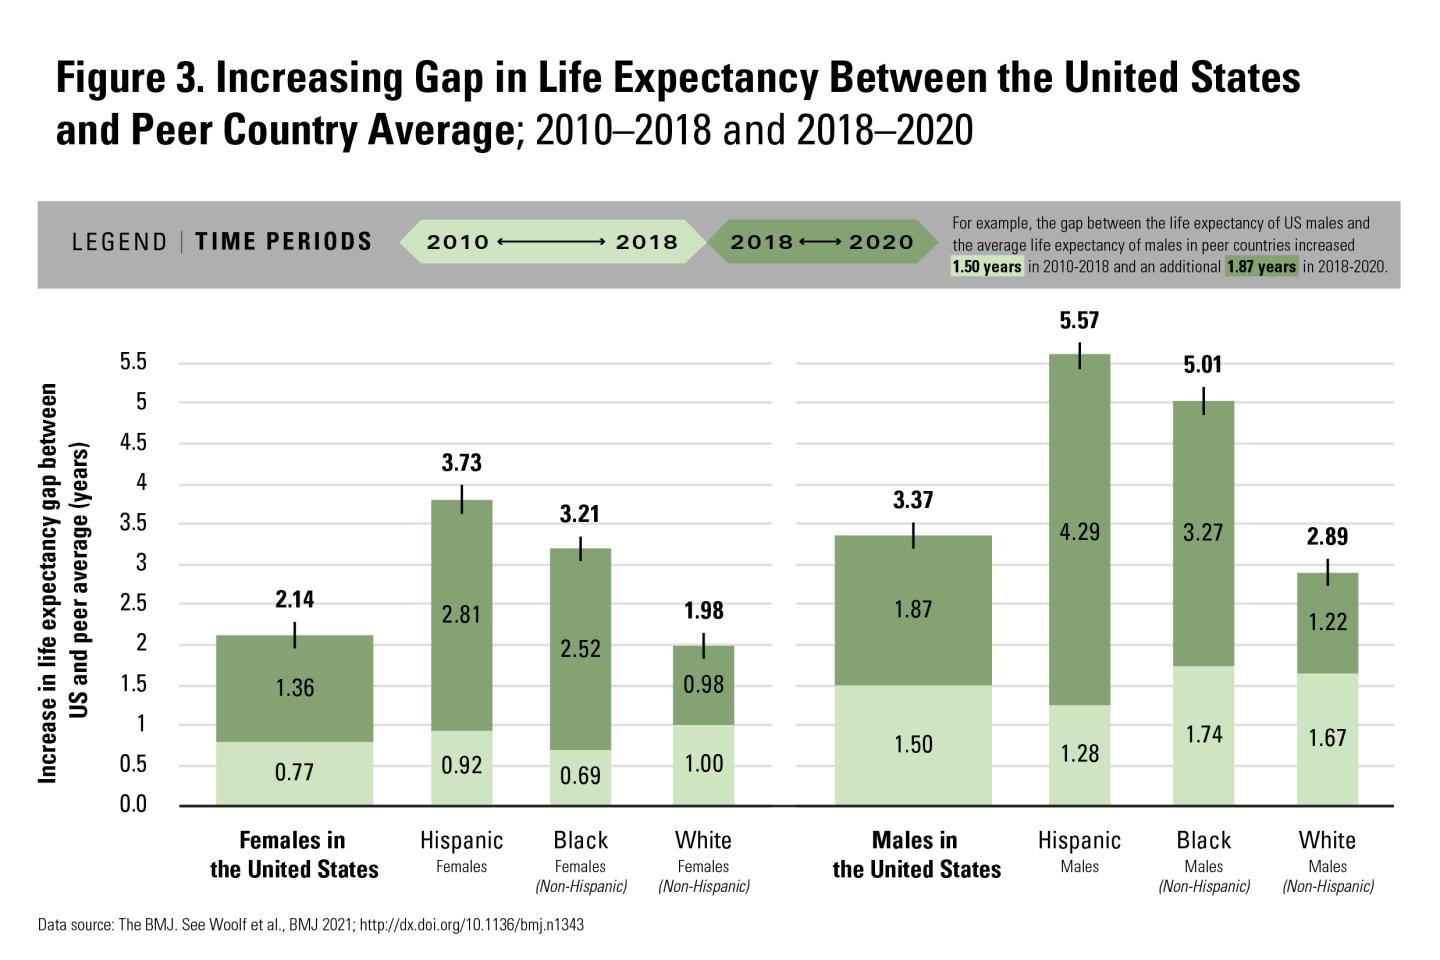 Figure 3, Increasing Gap in Life Expectancy Between the United States and Peer Country Average; 2010-2018 and 2018-2020